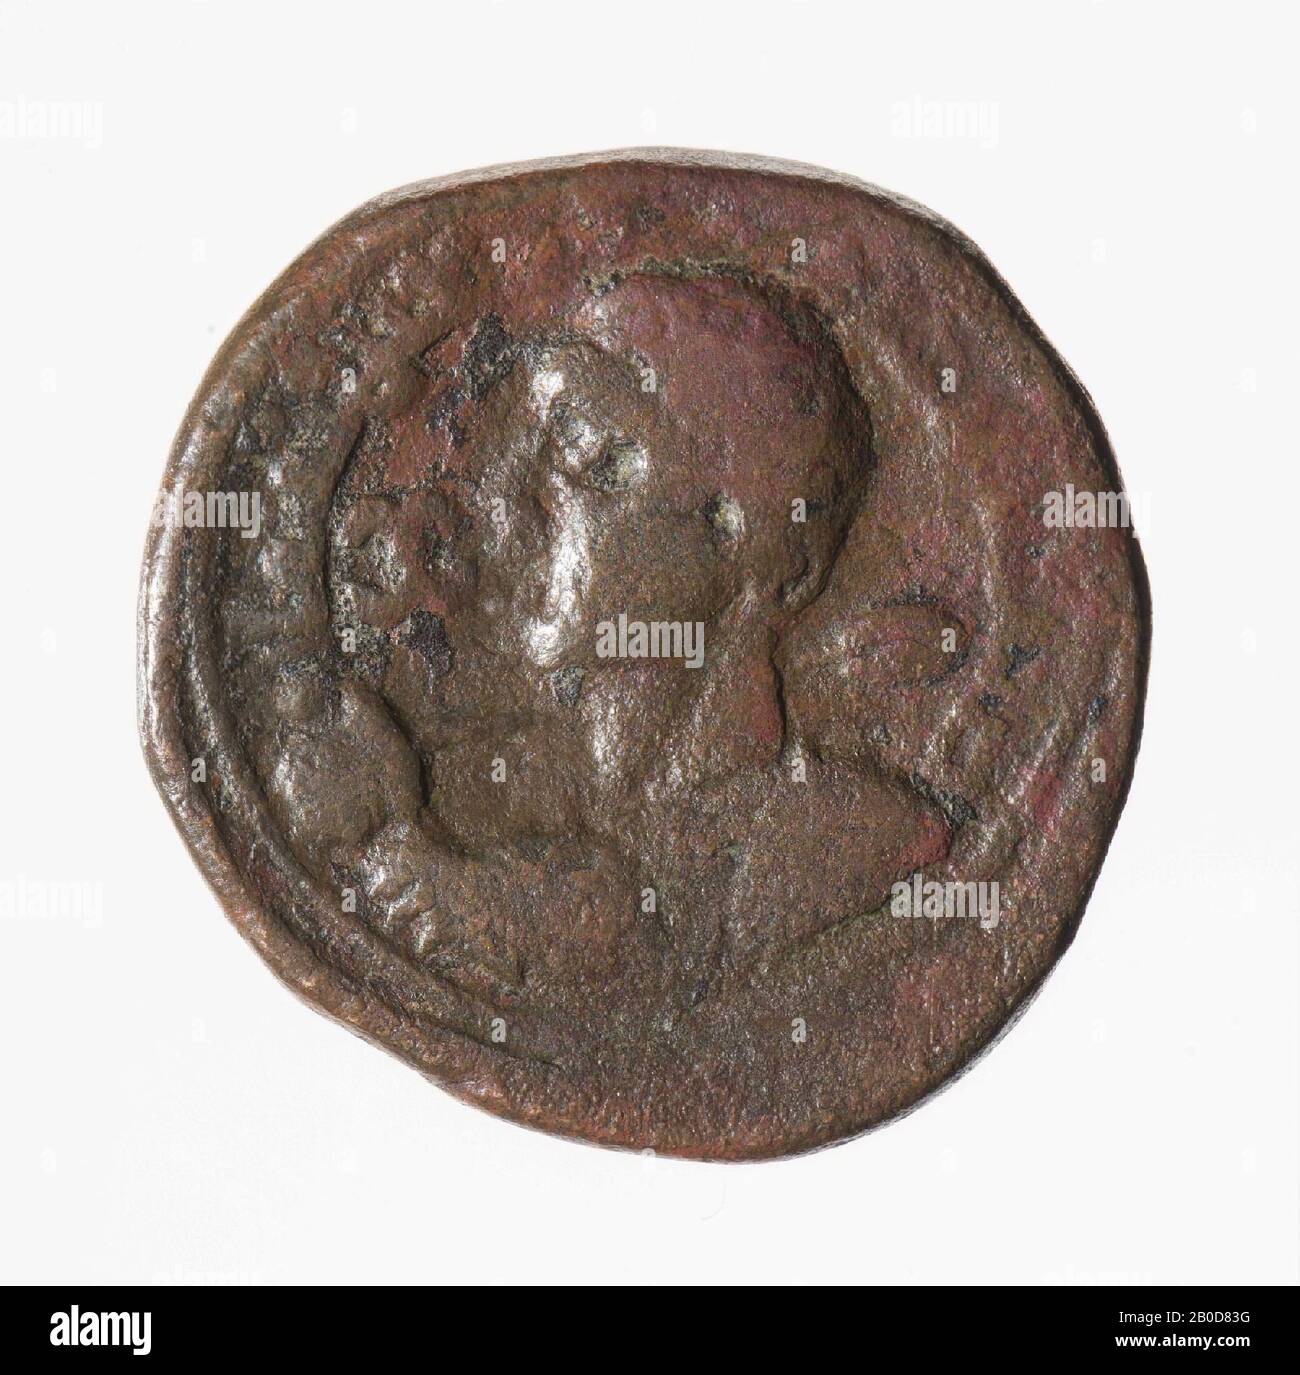 Front: Qutb ad-Din, left, as the Roman emperor Caracalla, dressed with kuras, staff? Over right shoulder and shield over left. Worn, remains of inscription. Reverse: rules inscription., Coin, dirham of Qutb ad-Din Muhammad, Zengid emir of Sinjar, metal, bronze, diam: 2,5 cm, wt. 10.4 grams, 1197-1219 AD, unknown Stock Photo